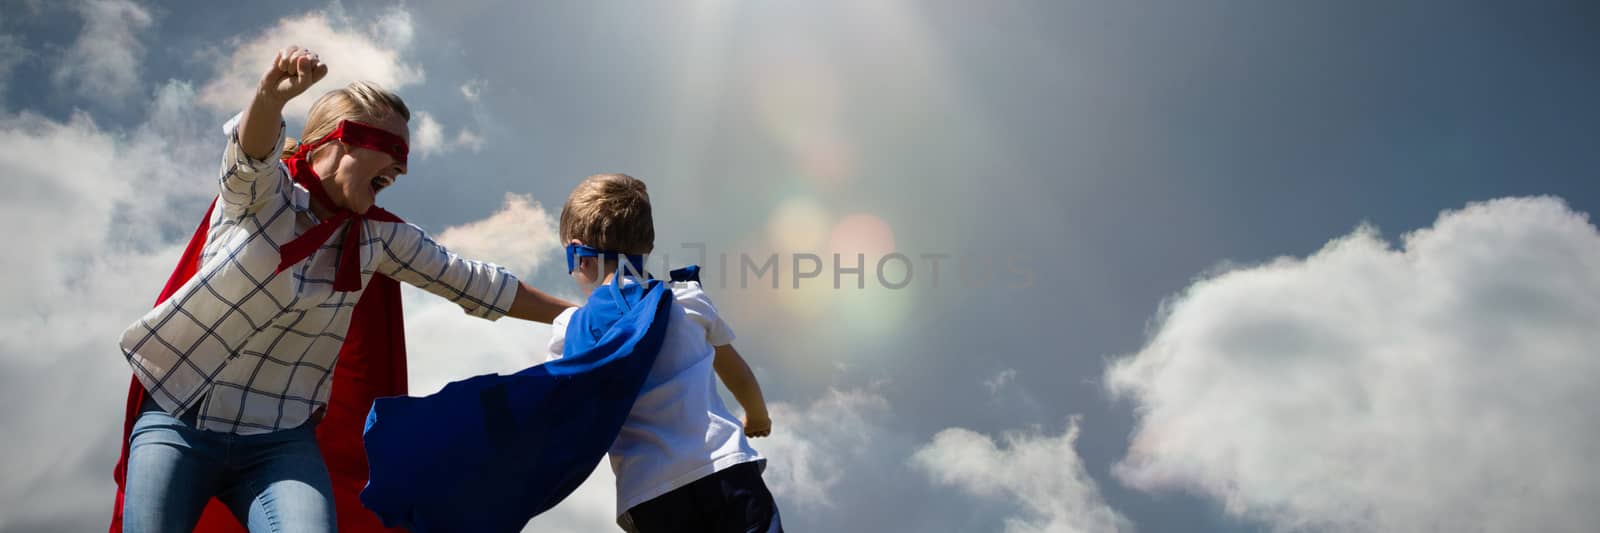 Mother and son pretending to be superhero against cloudy sky with sunshine 